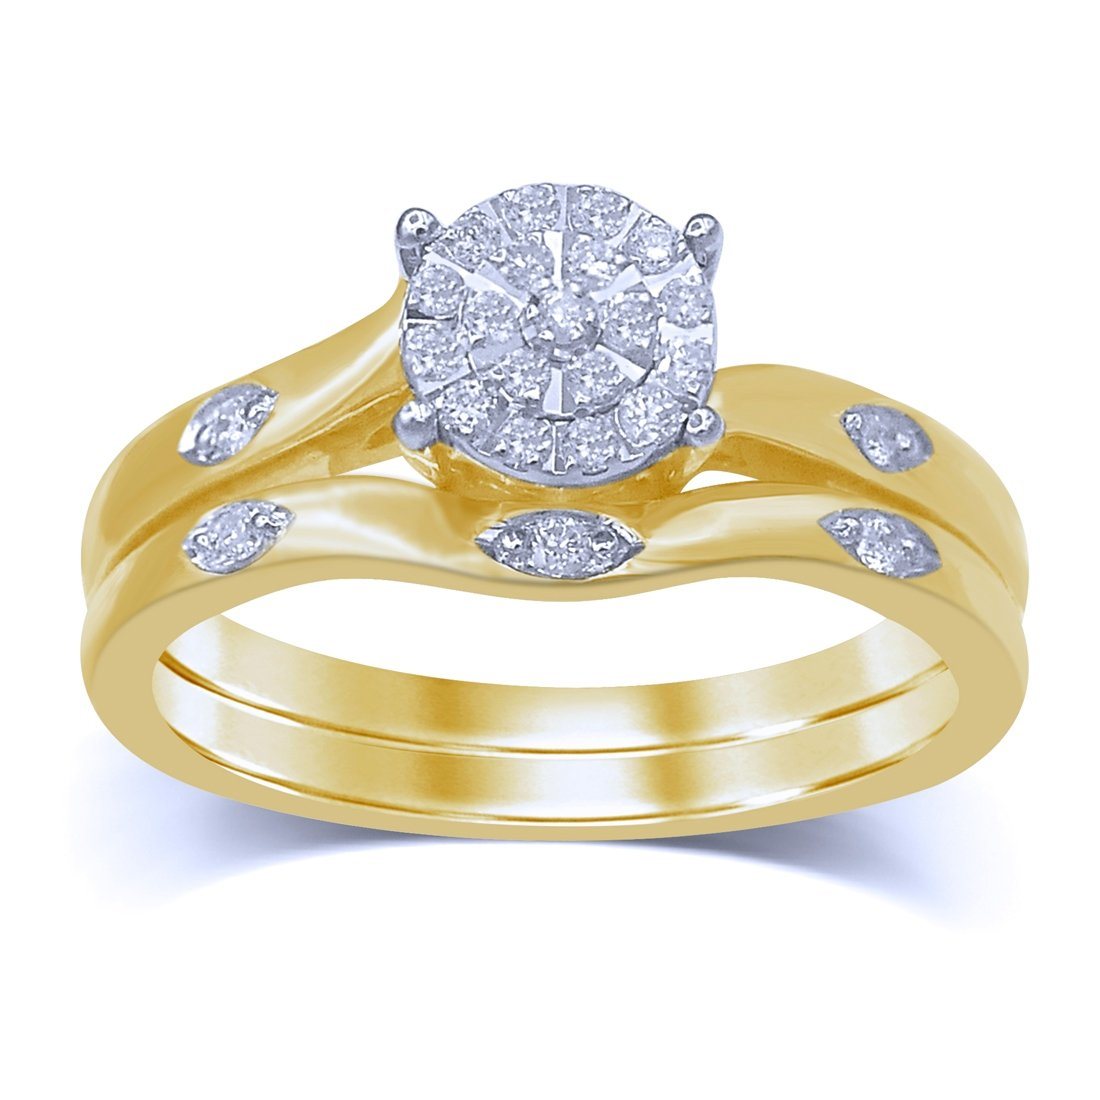 Martina Two Ring Set with 0.15ct of Diamonds in 9ct Yellow Gold Rings Bevilles 